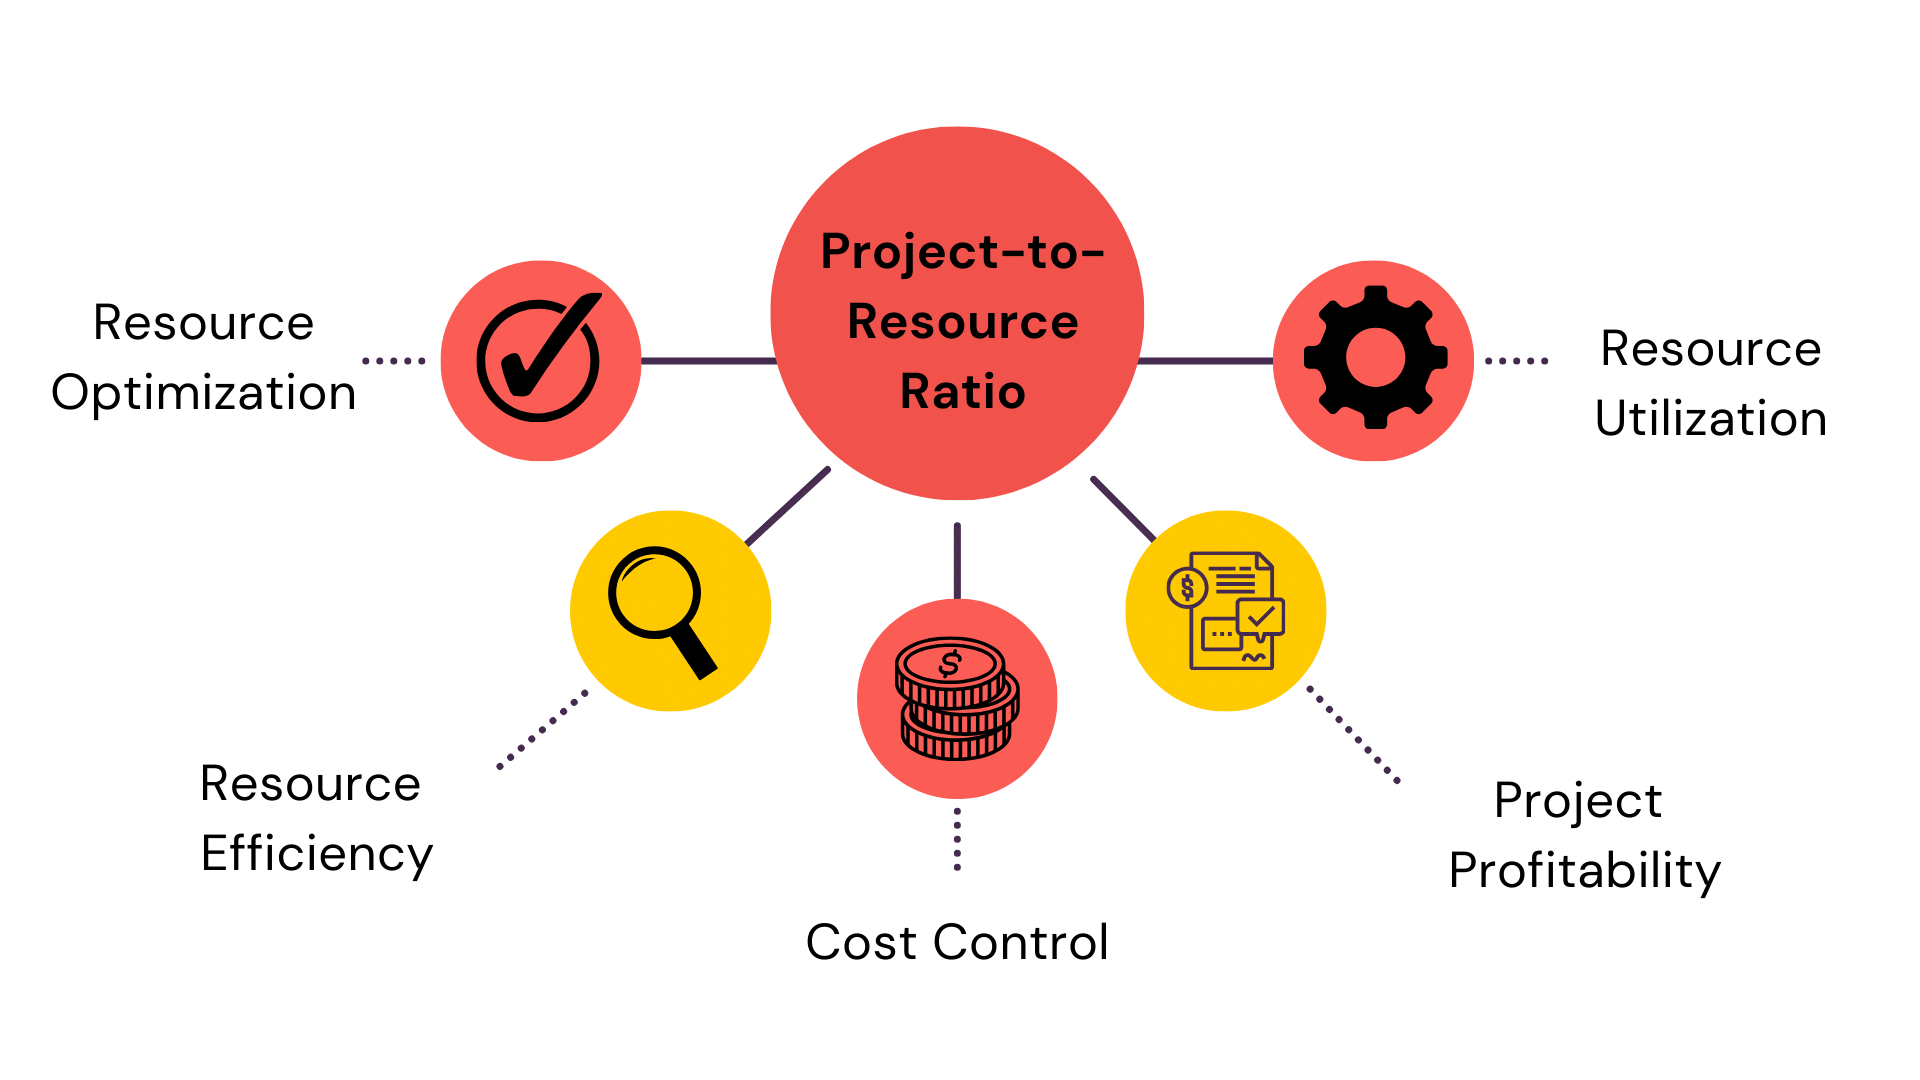 Project-to-Resource Ratio